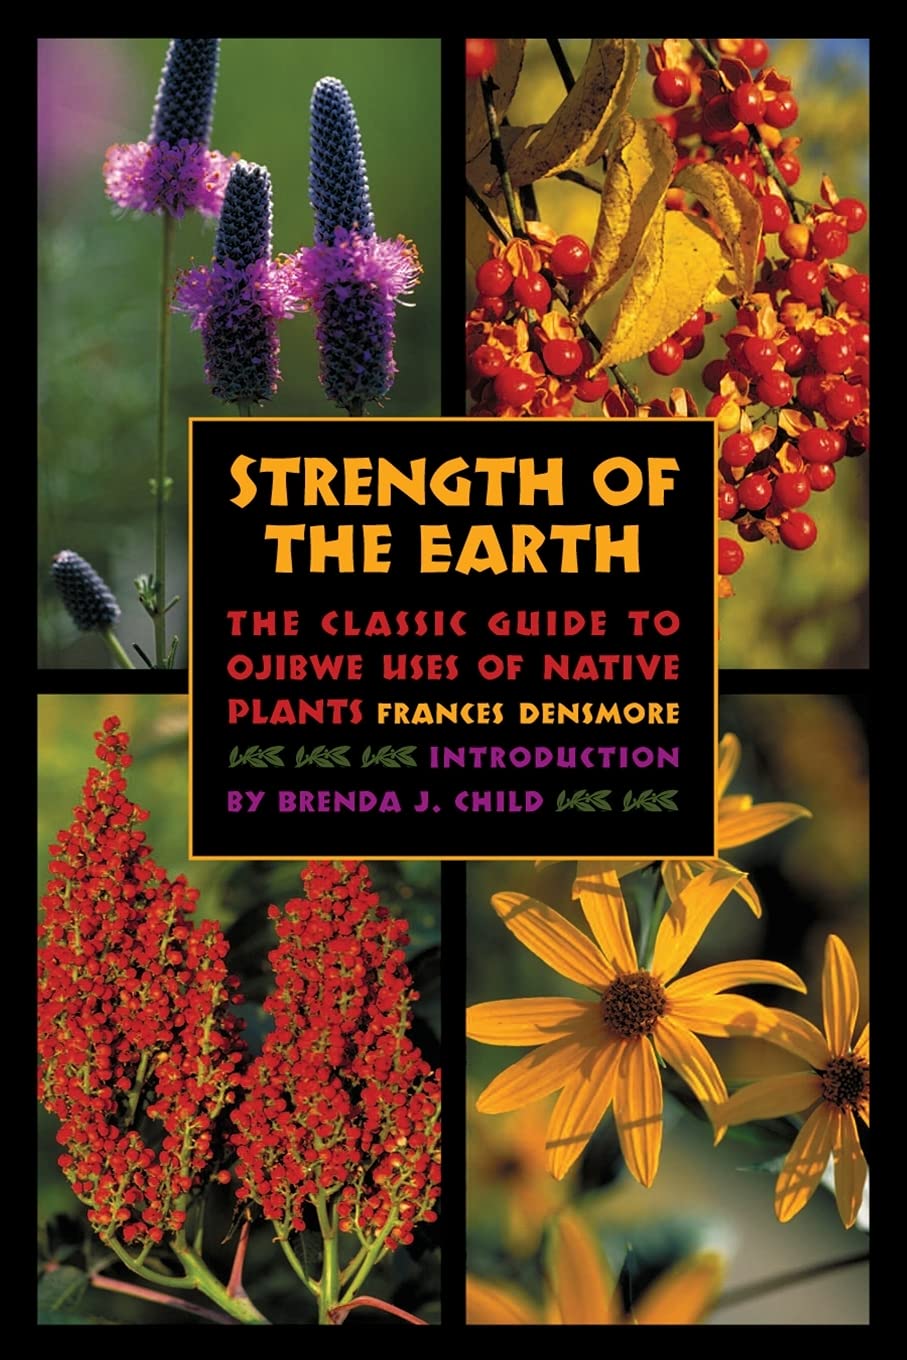 Strength of the Earth: The Classic Guide to Ojibwe Uses of Native Plants [Frances Densmore]